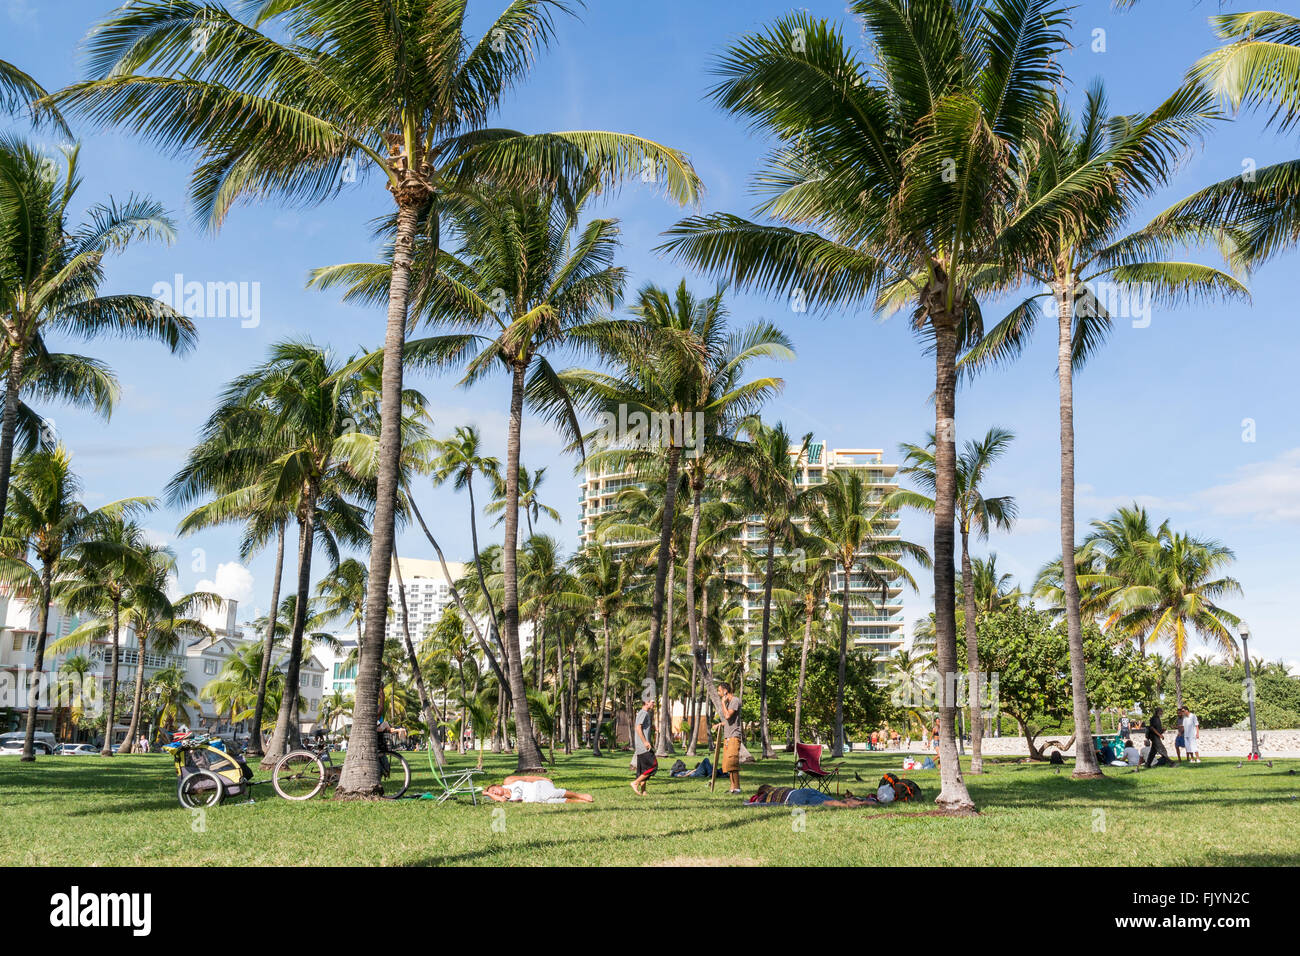 South Beach Boardwalk with people and palm trees in Miami Beach, Florida, USA Stock Photo